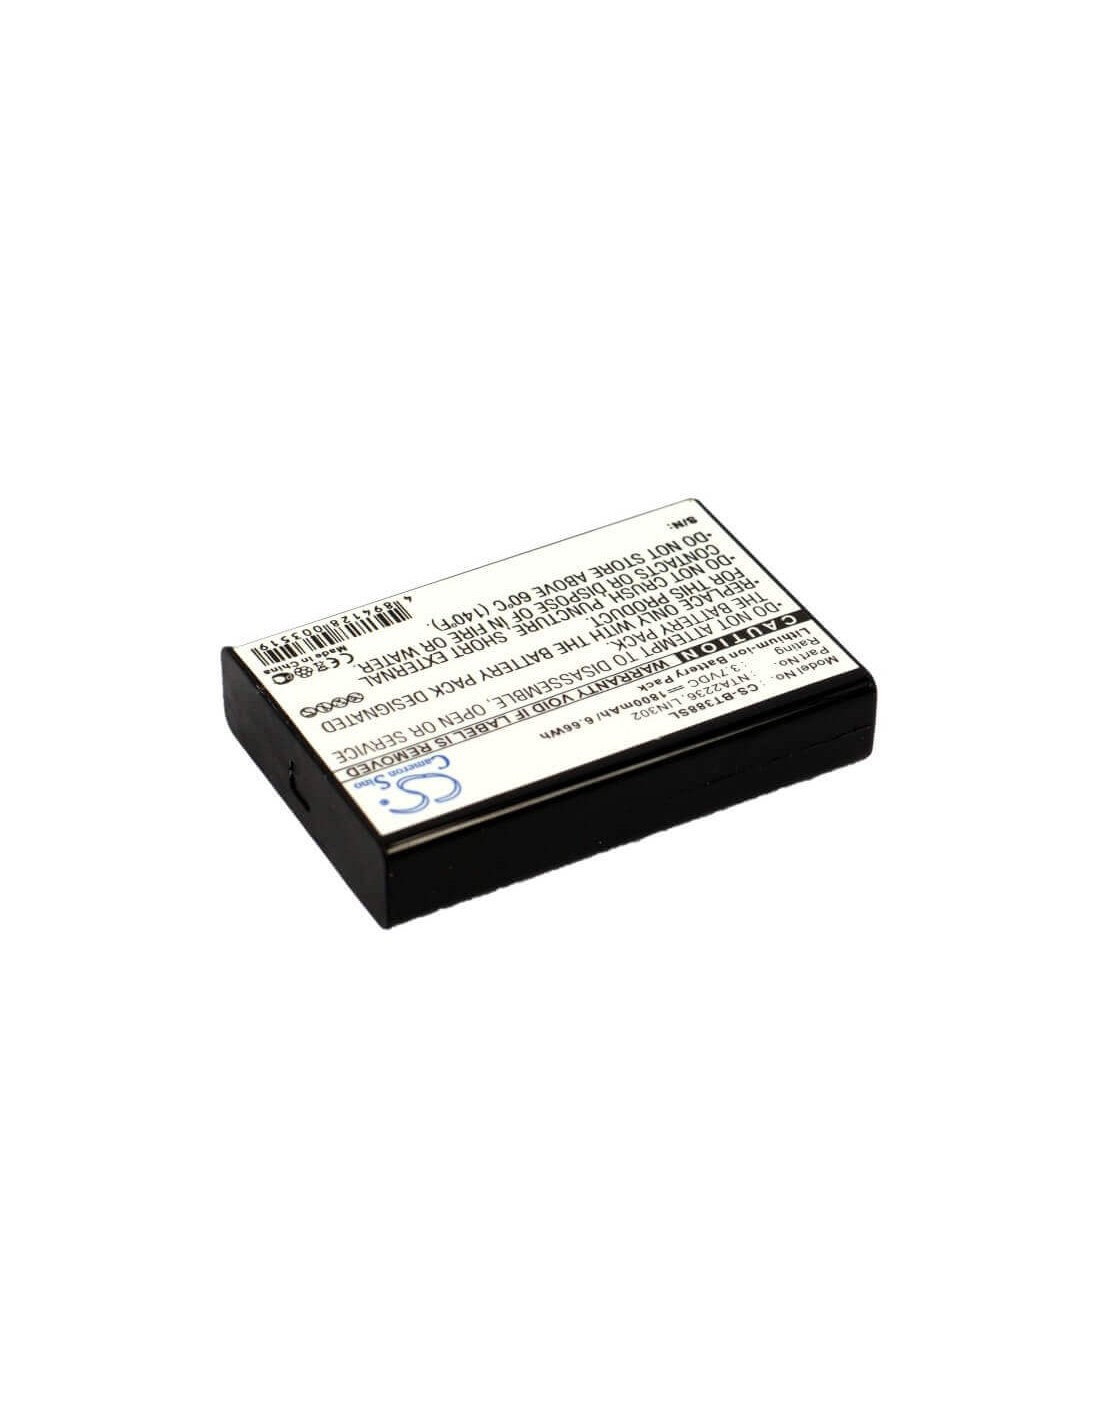 Battery for Oncourse Sirf Star Iii 3.7V, 1800mAh - 6.66Wh